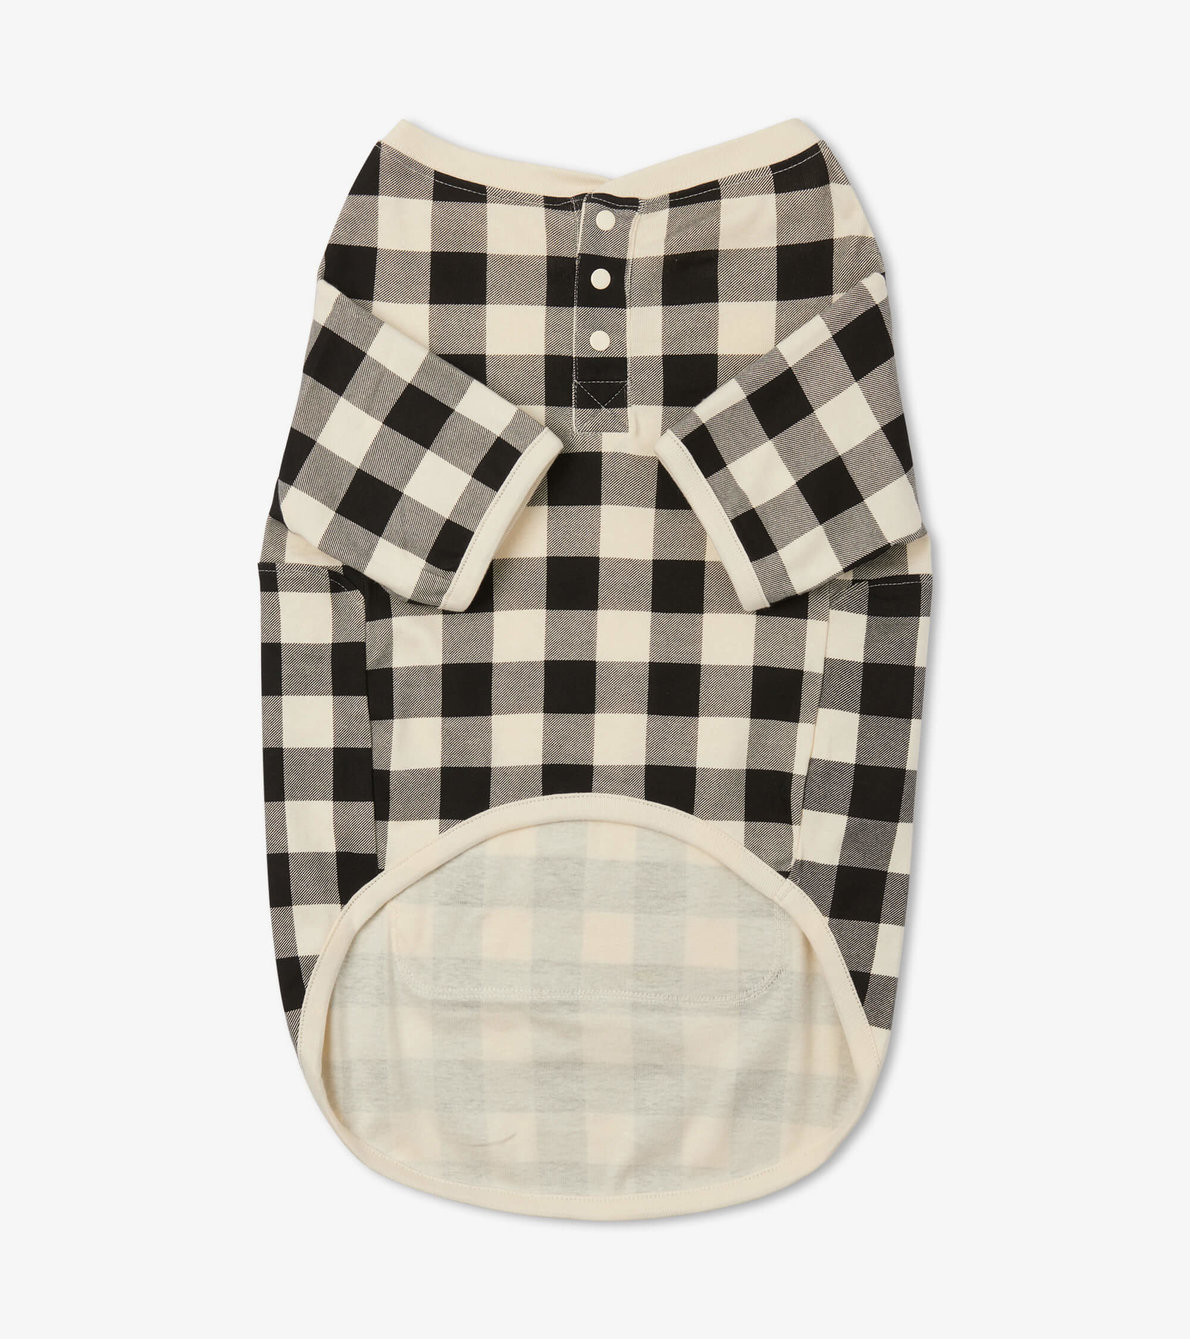 View larger image of Cream Plaid Dog Tee